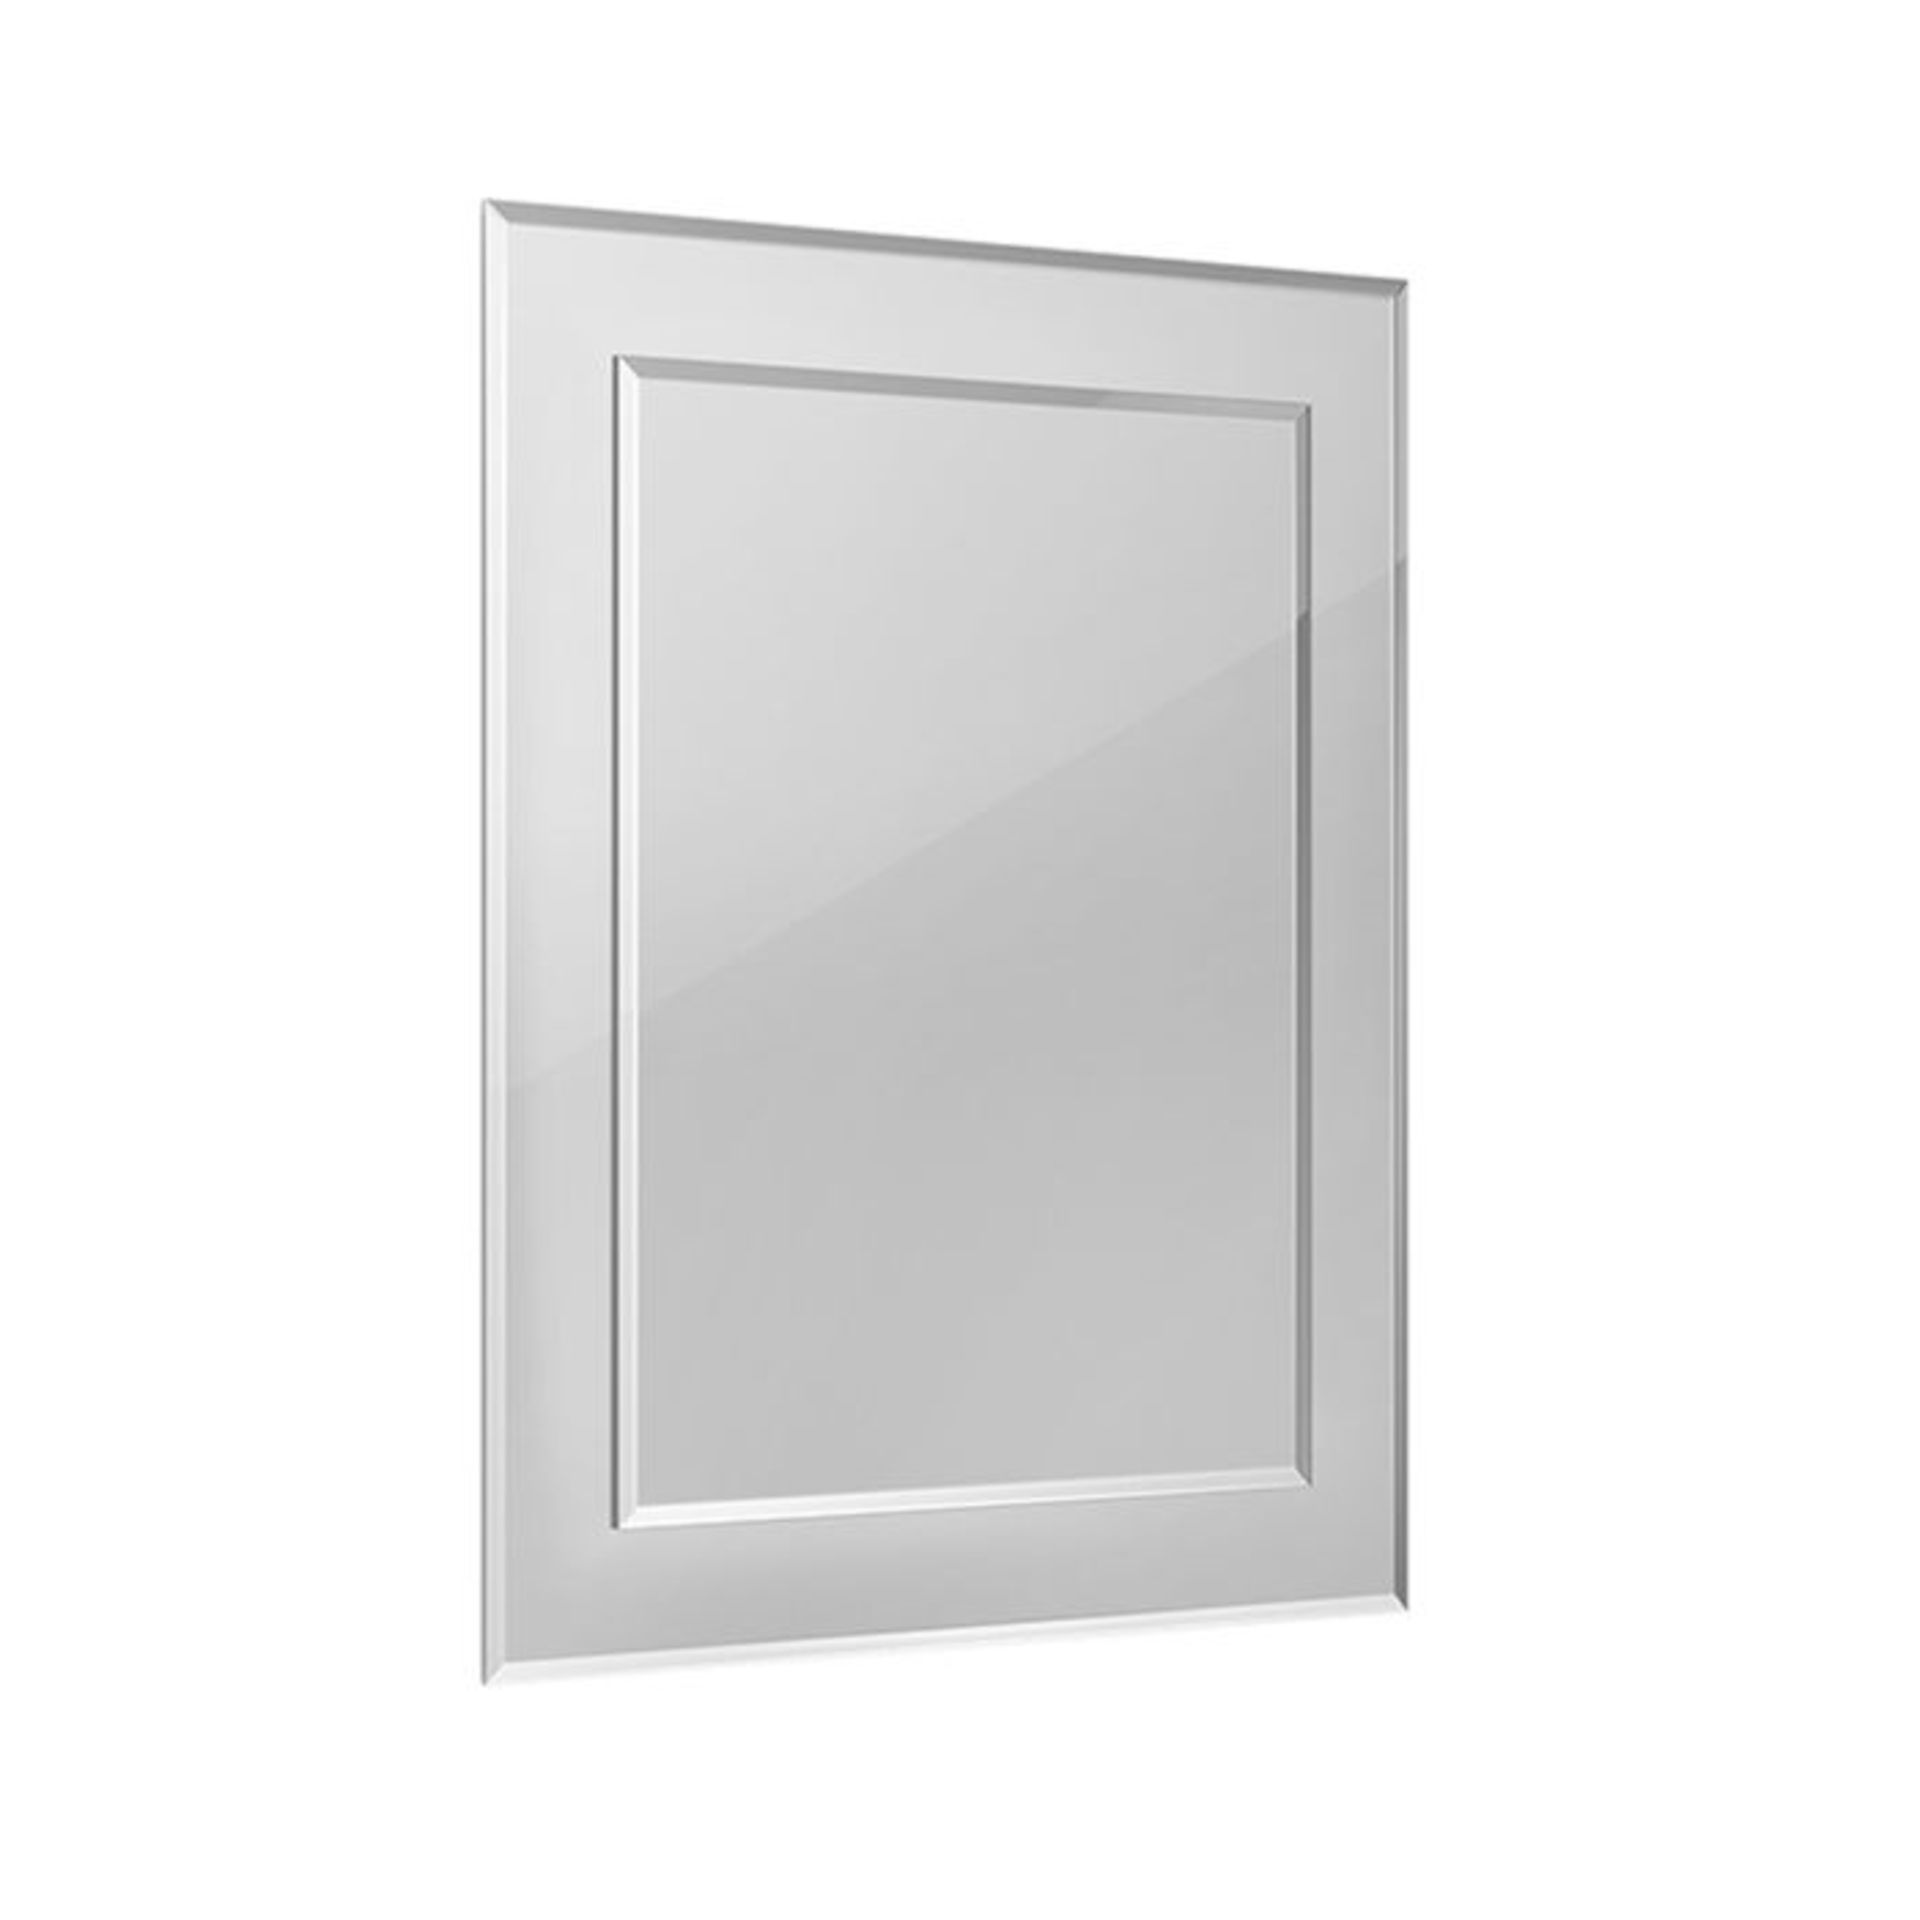 NEW 400x500mm Bevel Mirror. ML149. Smooth beveled edge for additional safety Supplied fully ass...